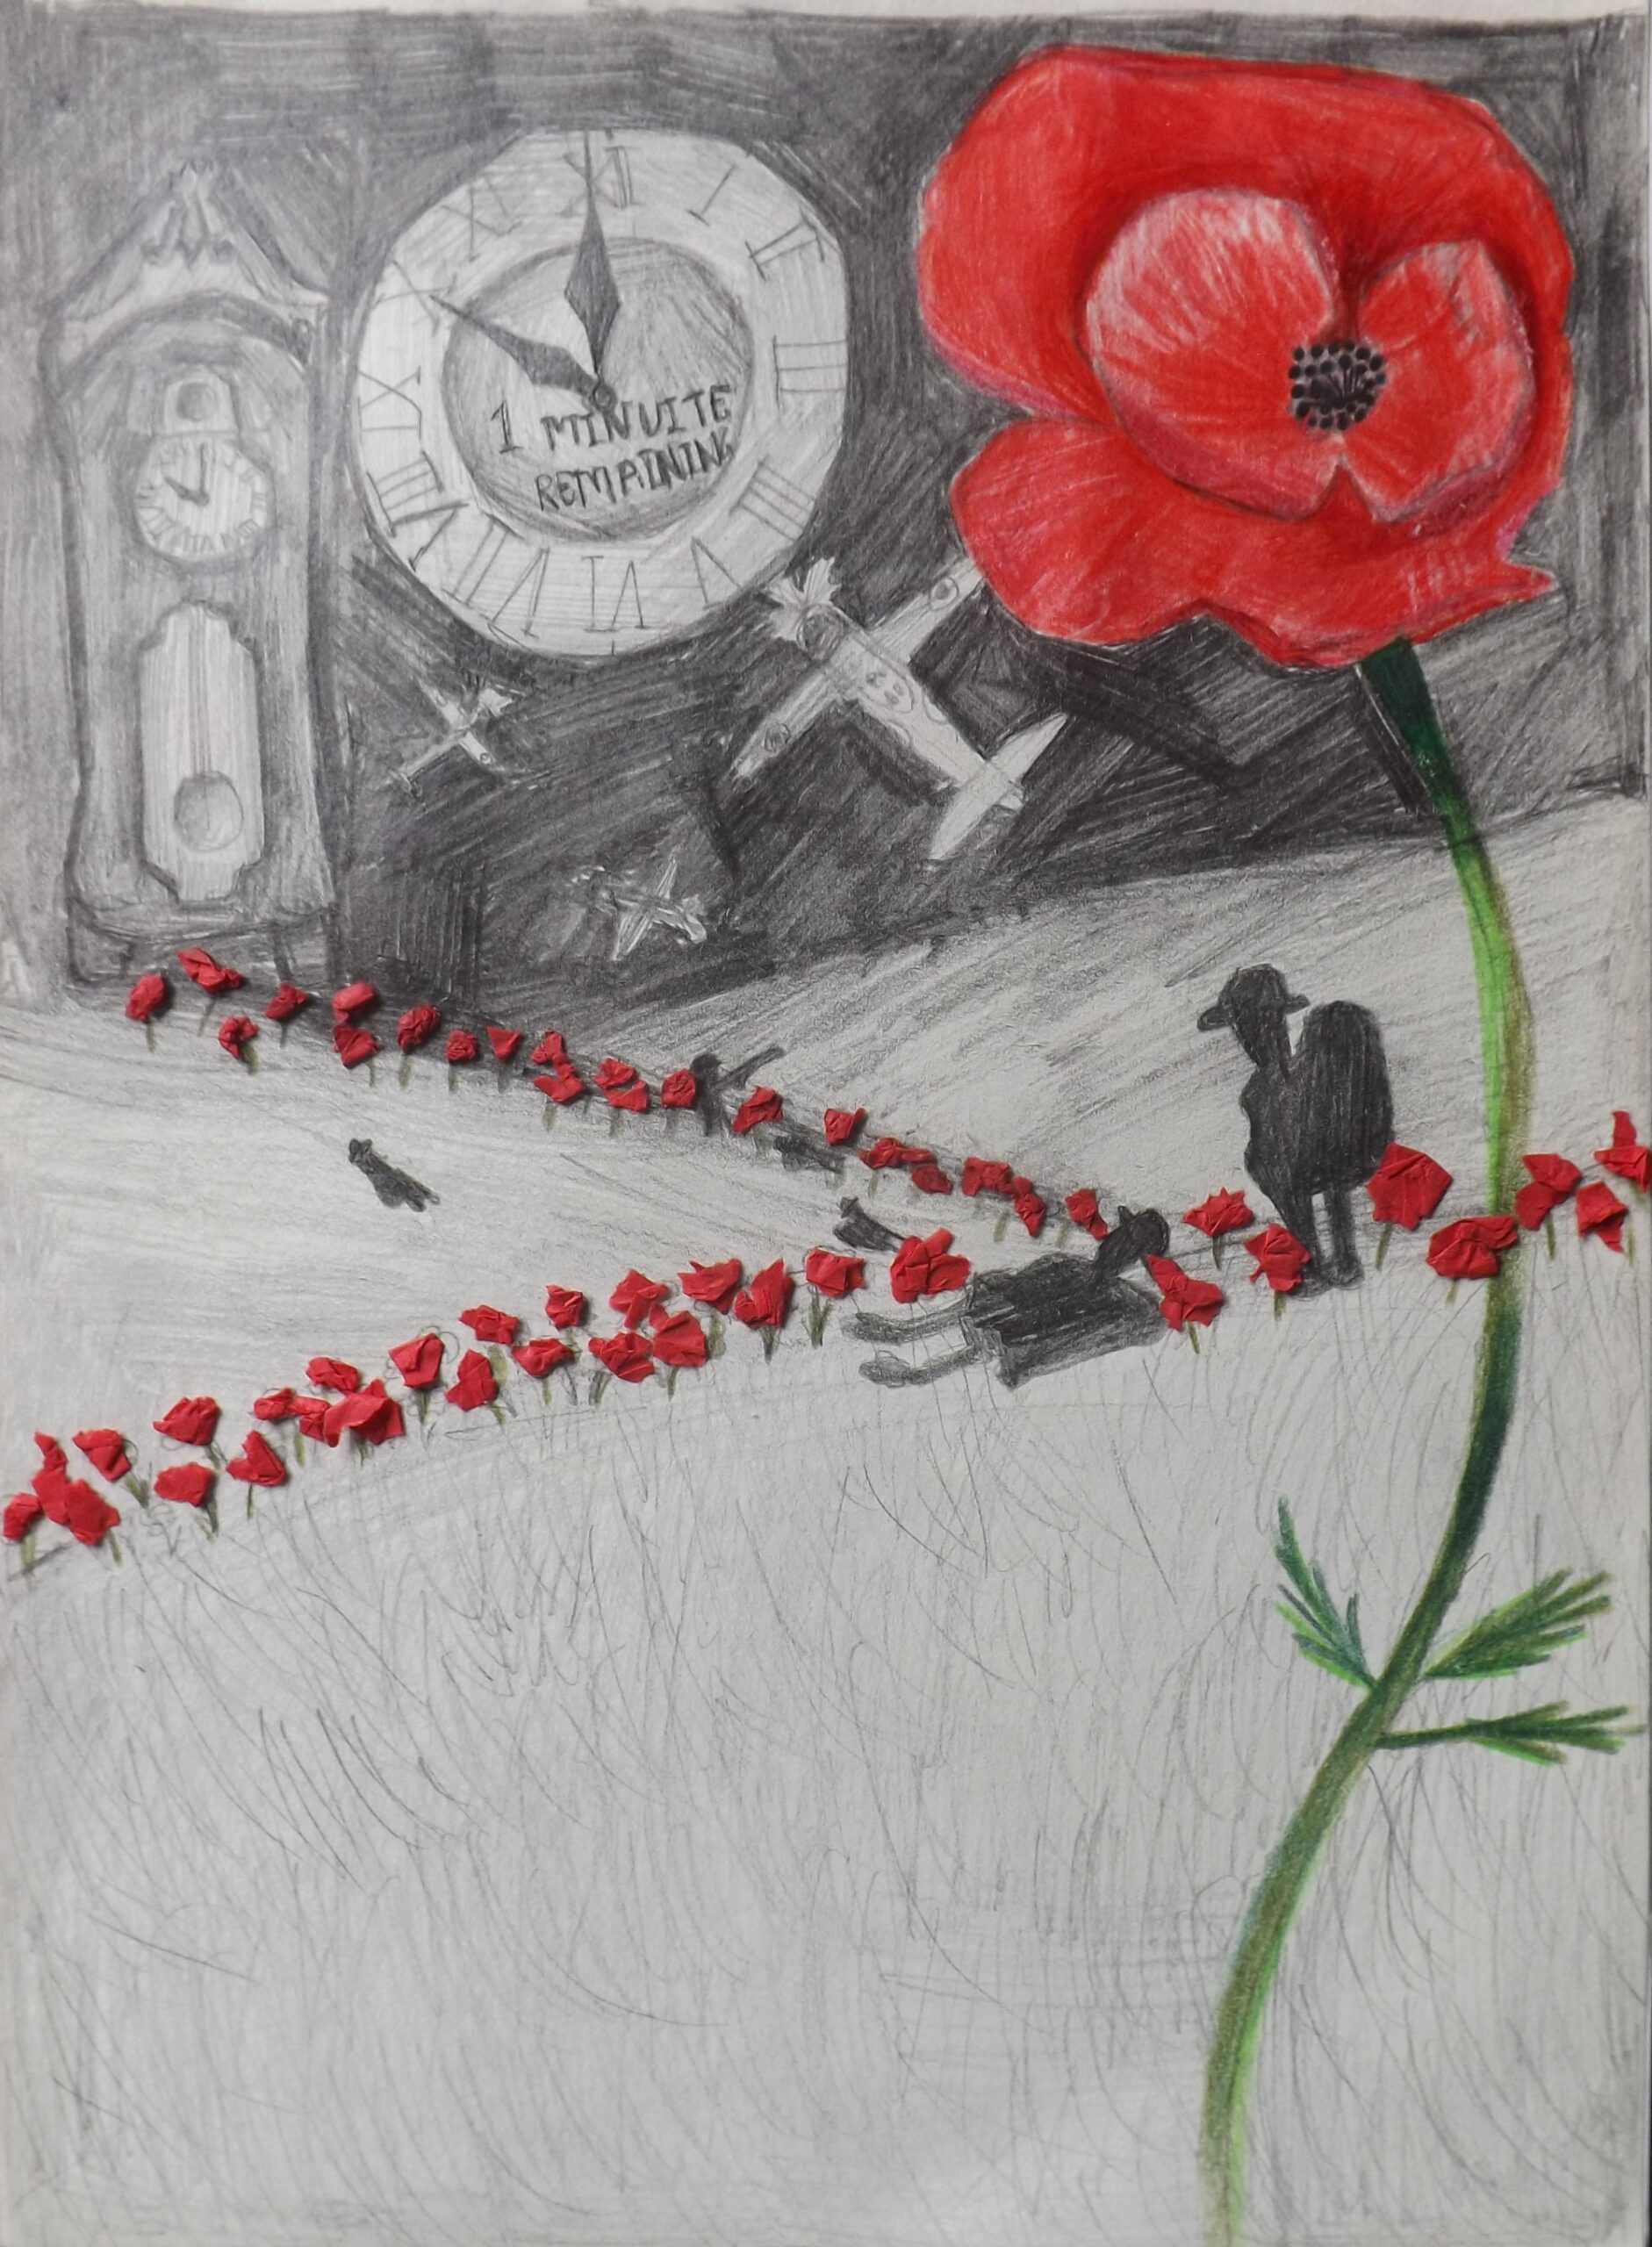 By Millie, Hinchley Wood Secondary School